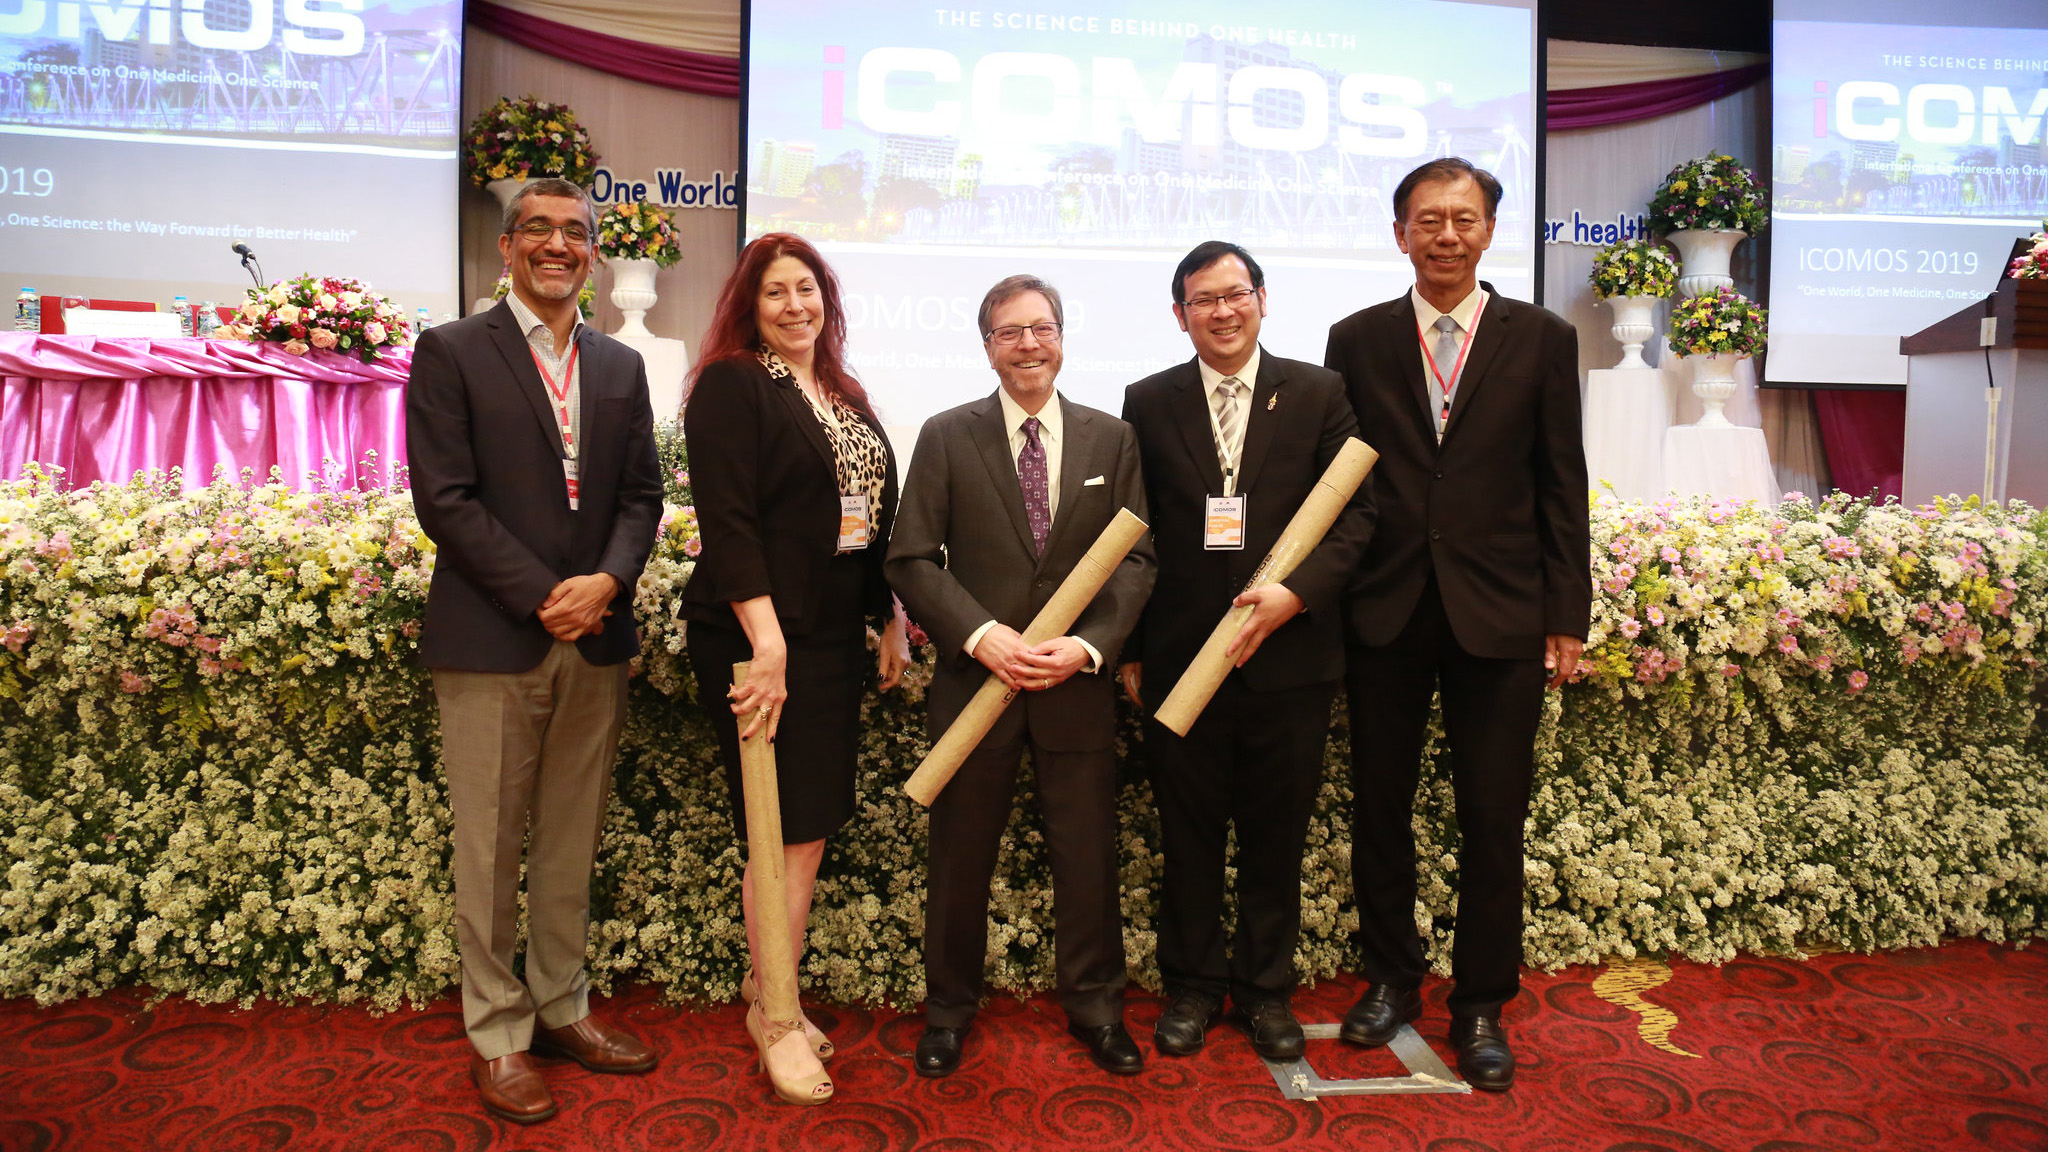 iCOMOS 2019 Speakers Pose for a Group Photo